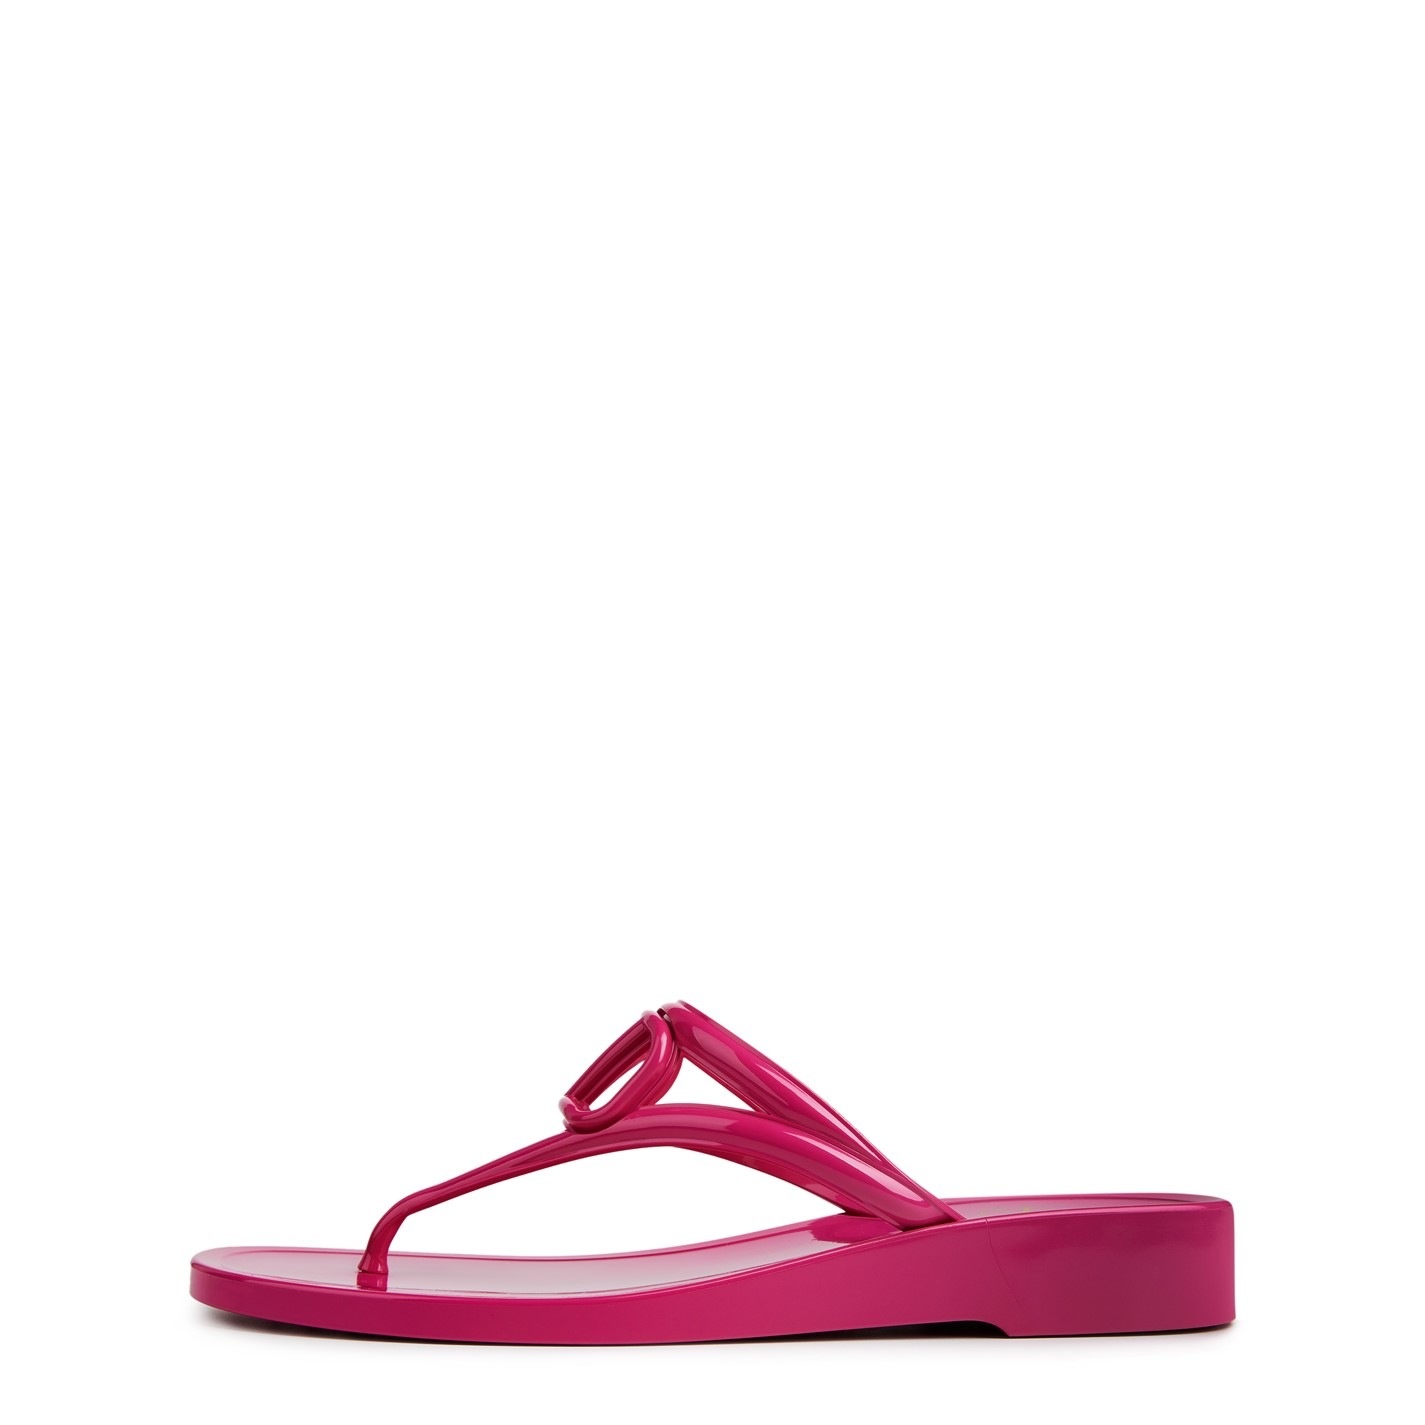 RUBBER THONG SANDALS - 3